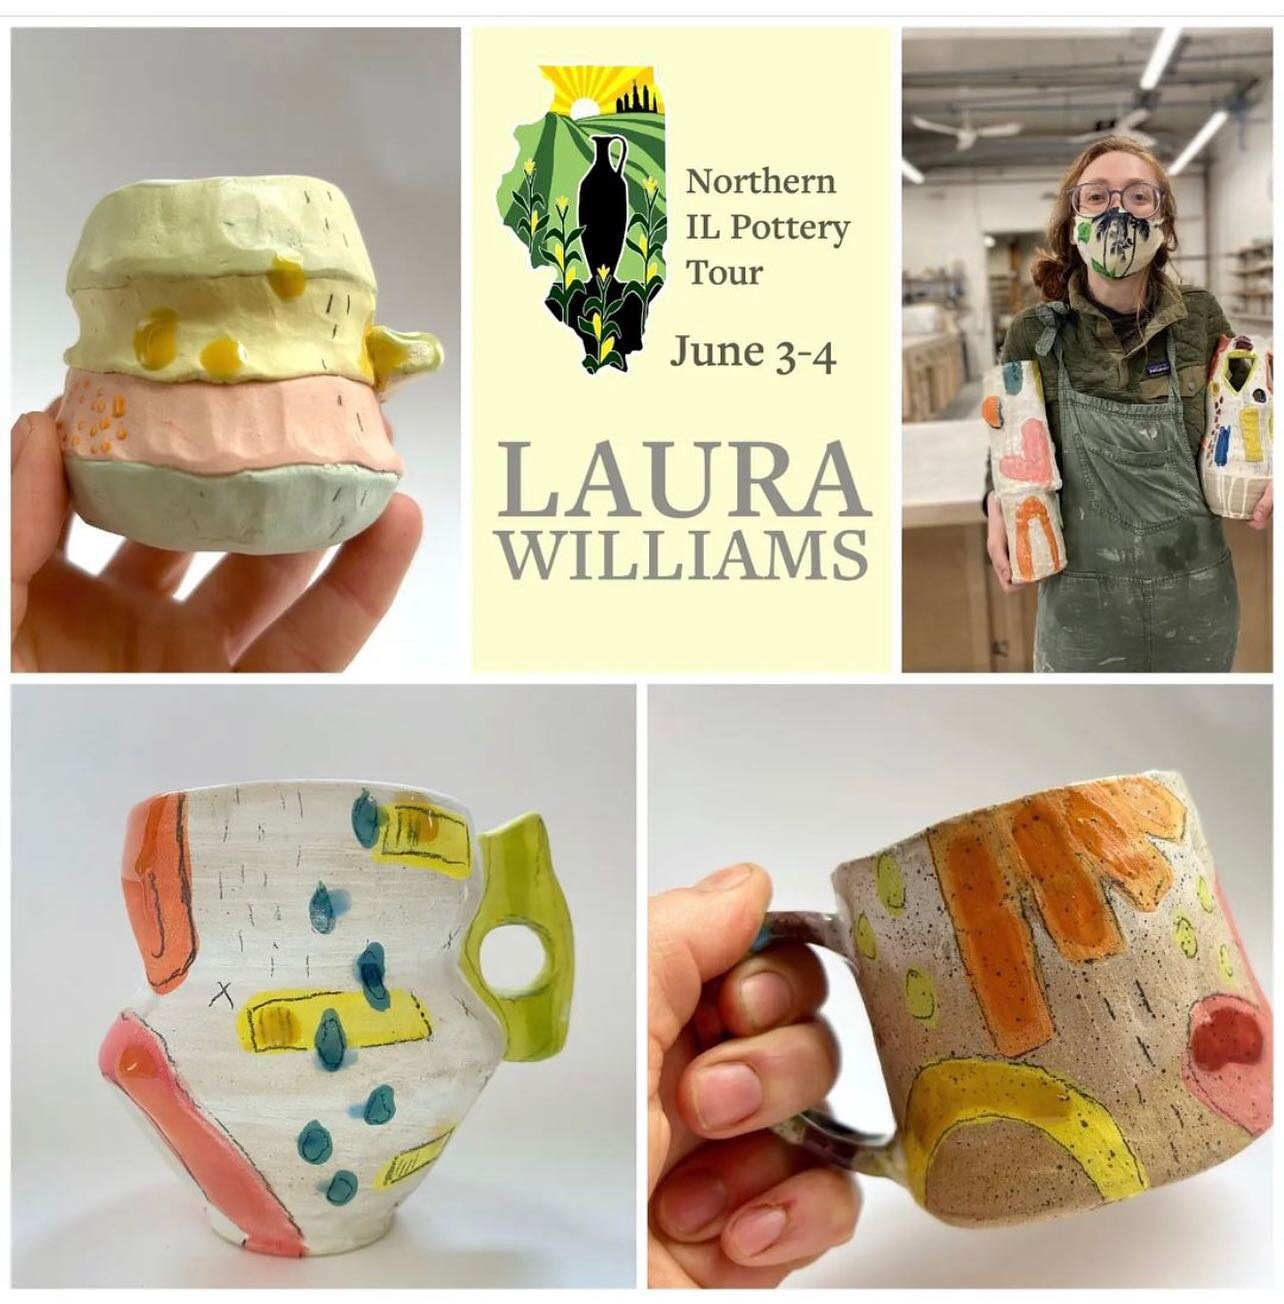 Check out this beautiful work by @laura.williams.studio.  Laura will be at the Sandwich stop on the @northernilpotterytour with me June 3-4th. Put it on your calendar. #northernilpotterytour #ceramics #illinoisartist